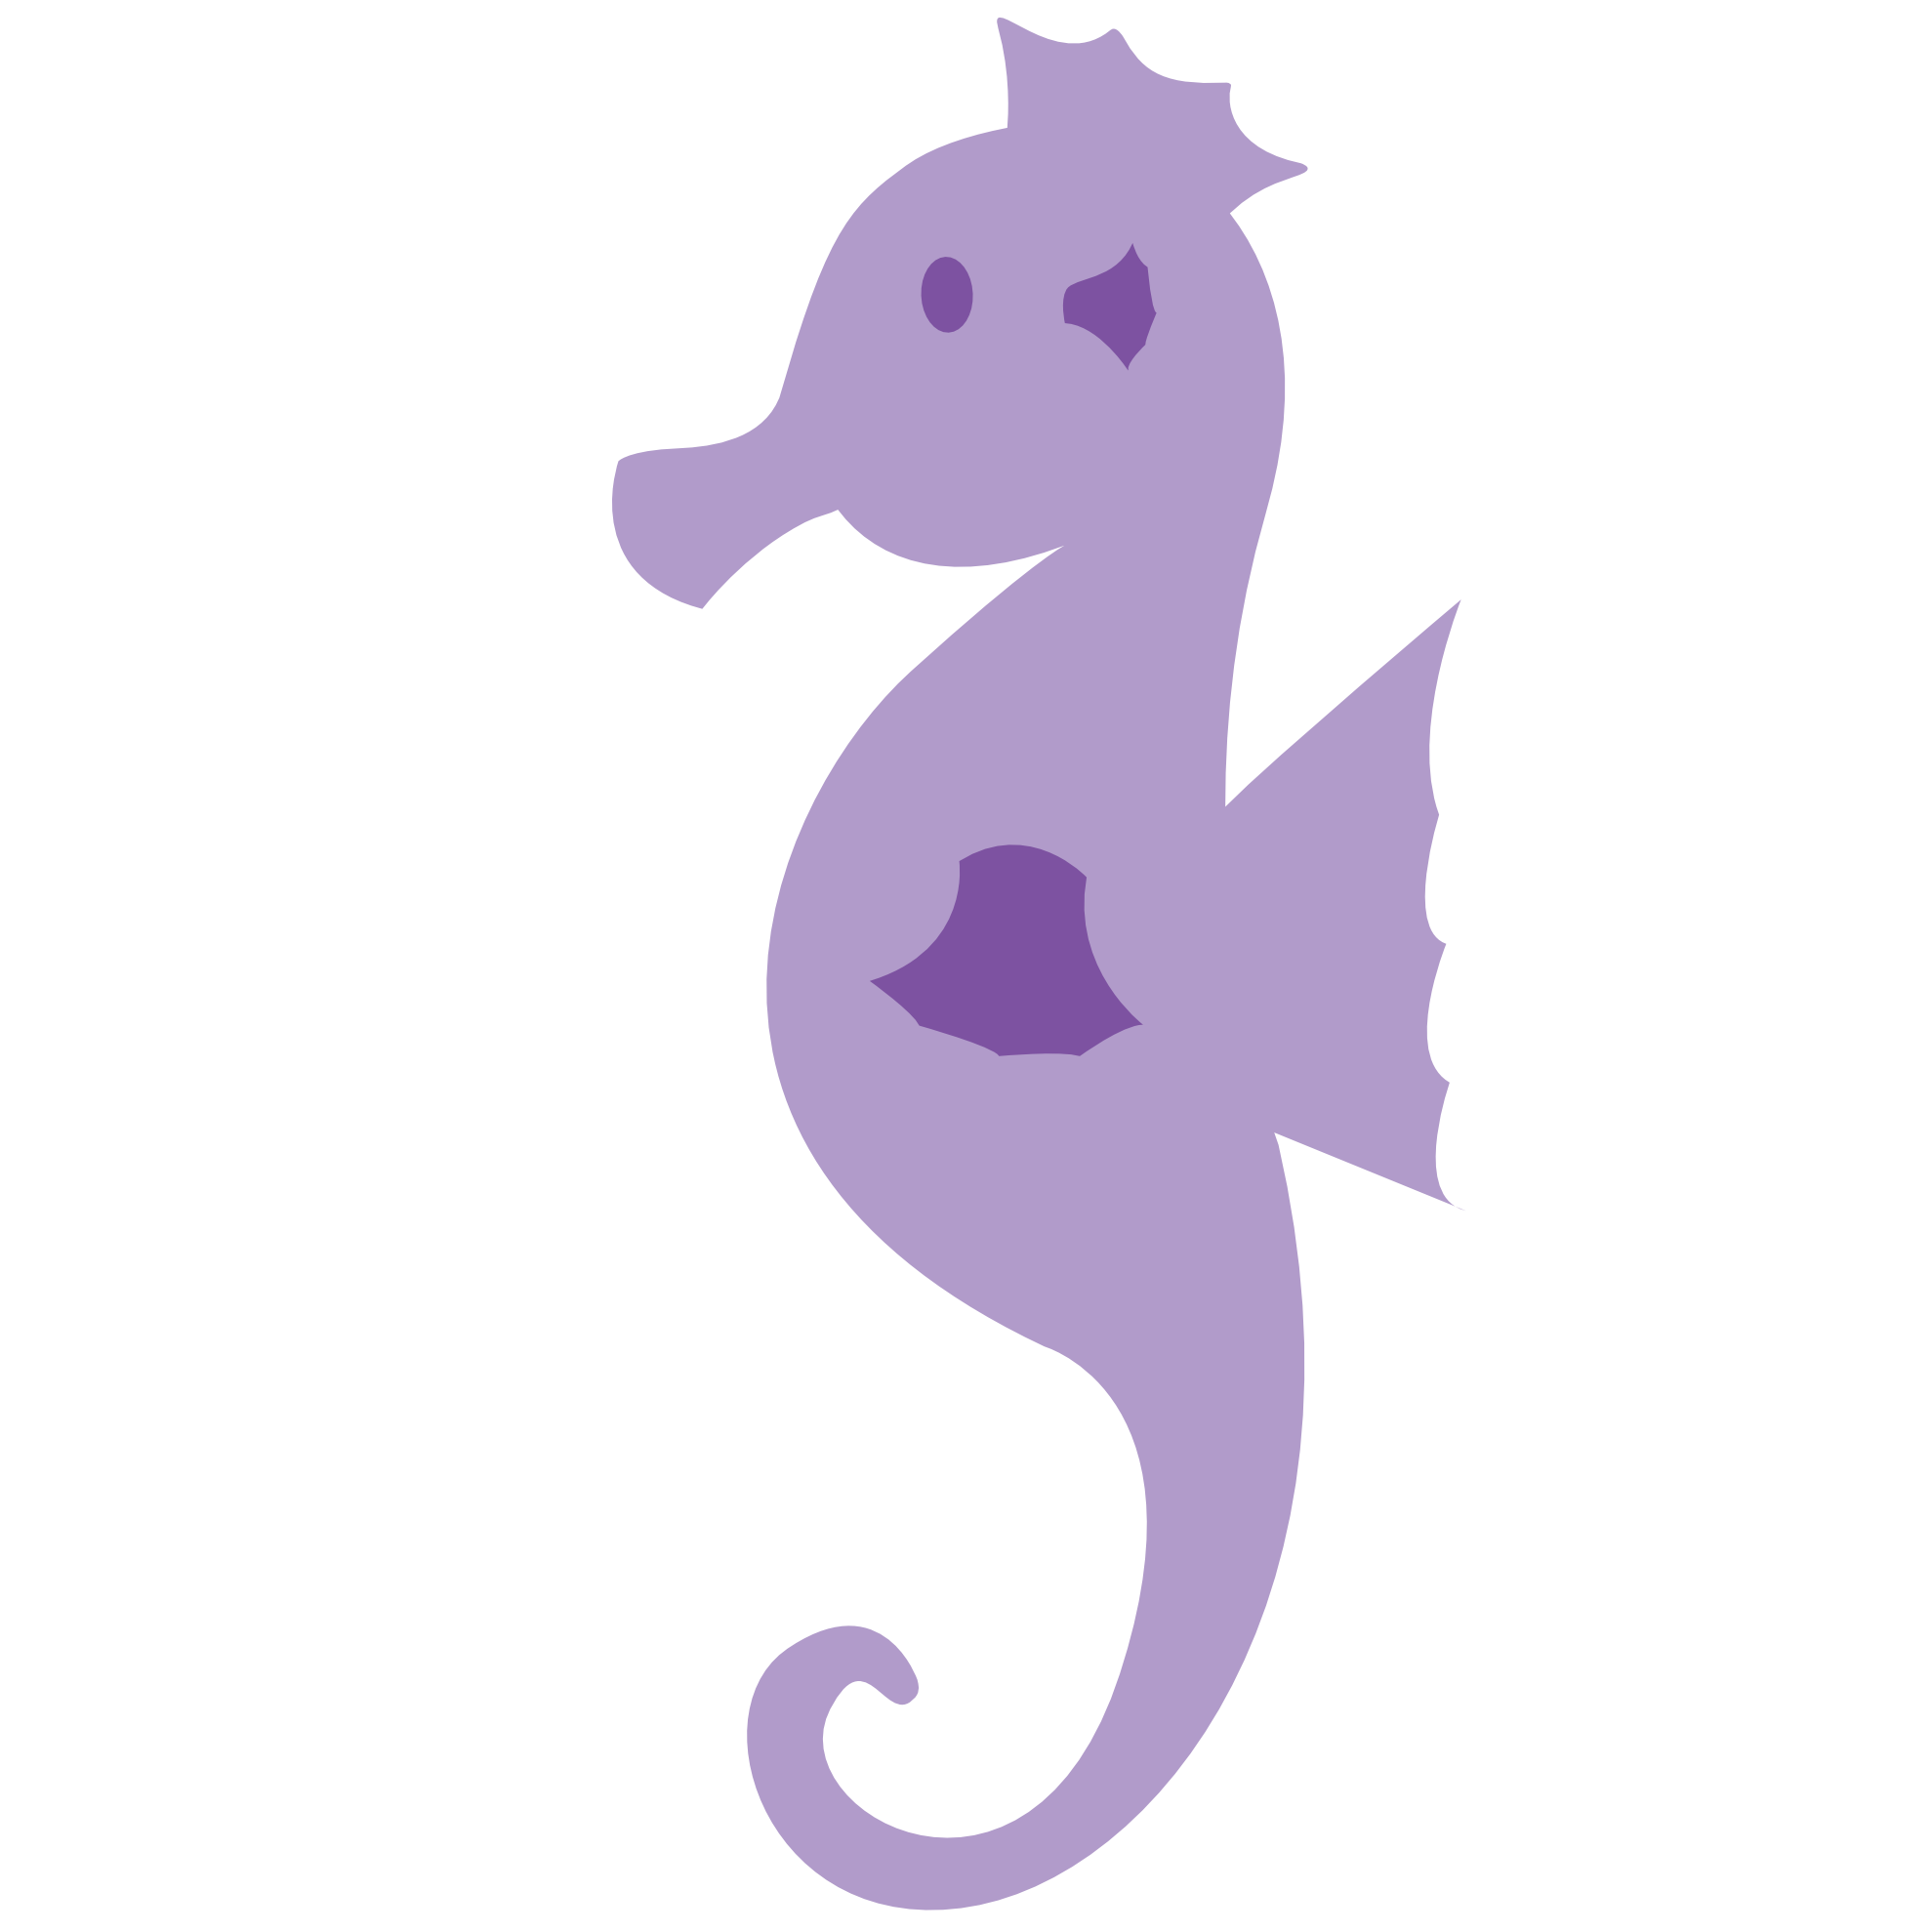 Seahorse Clipart Free - ClipArt Best